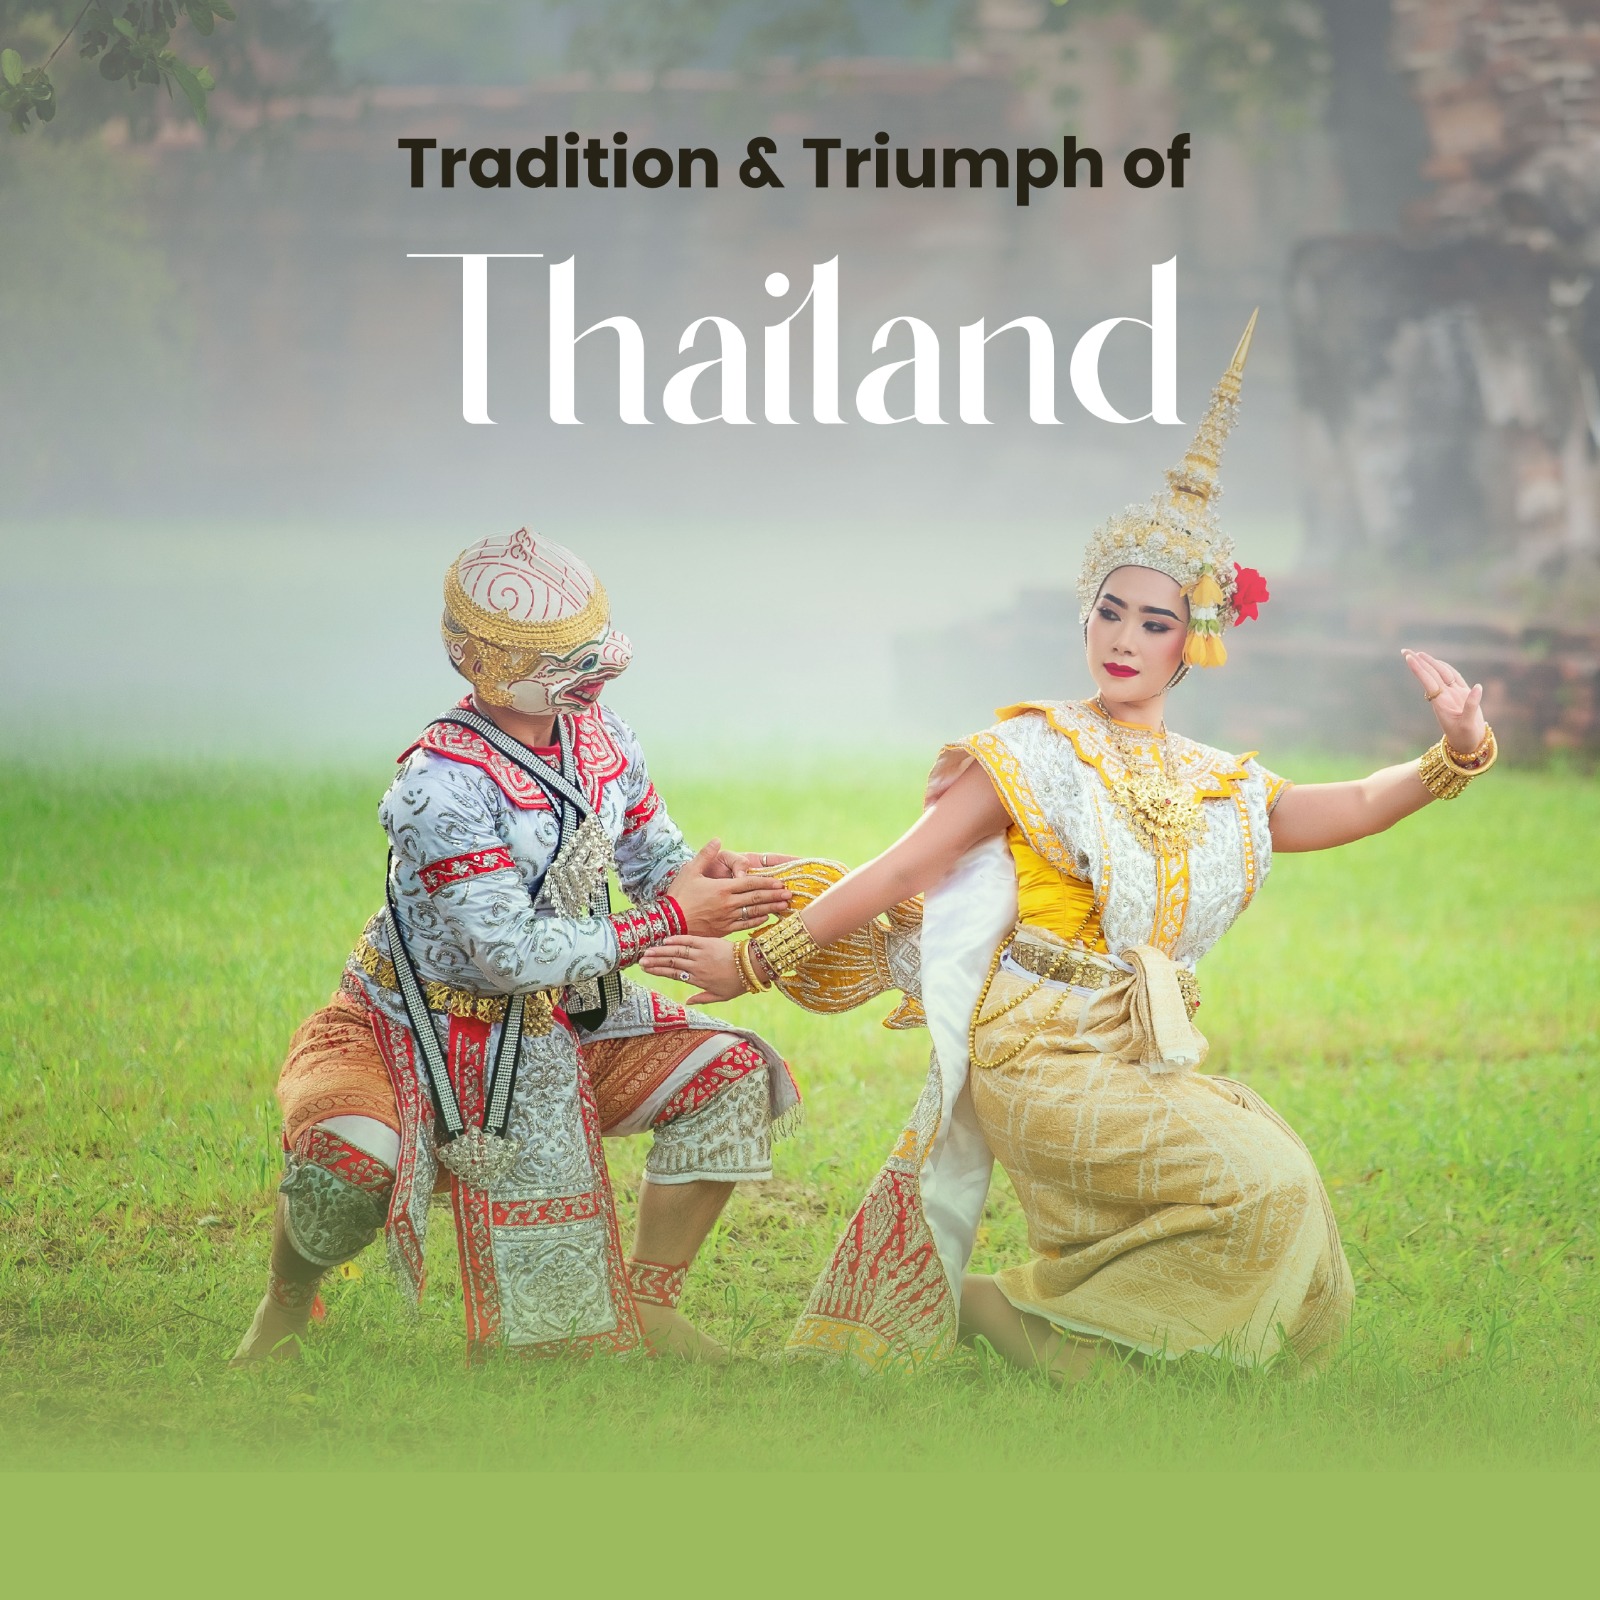 Tradition and Triumph of Thailand